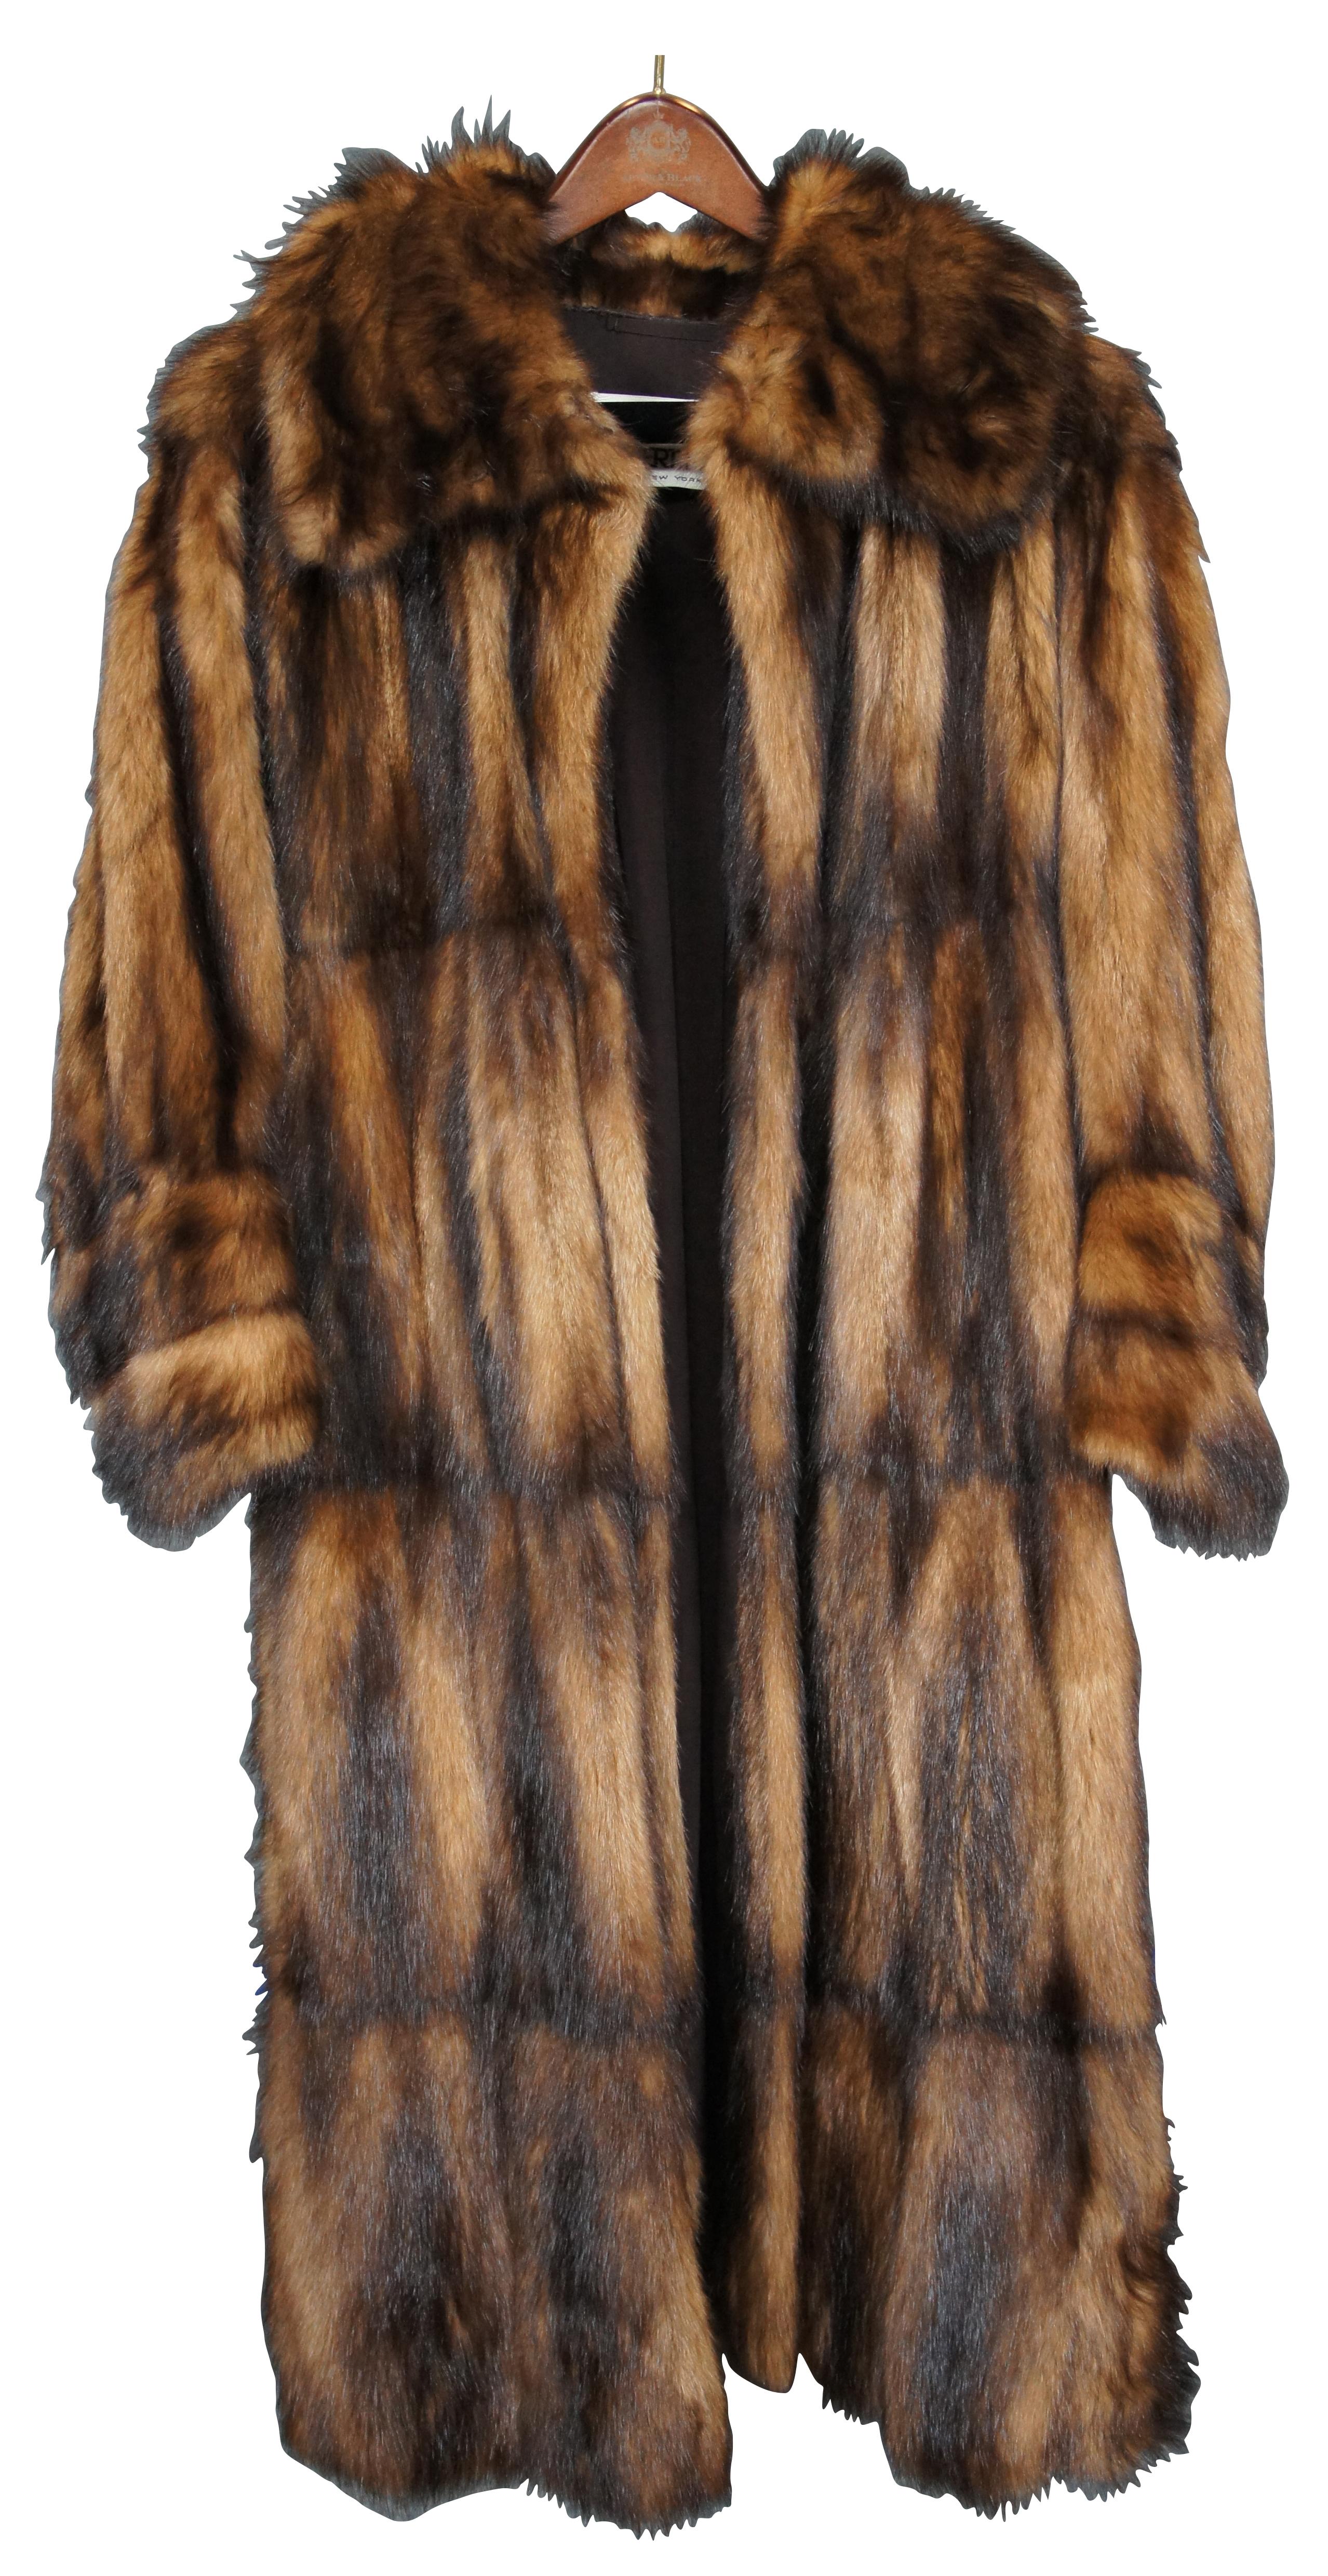 Vintage two tone brown mink fur coat, full length with swivel hook and loop closure and two side pockets. Owner of this coat is approx. 5'2'', 110lbs.

Measures: Shoulders - 20” / Arm Length - 23” / Chest - 52” / Back Length – 50”.